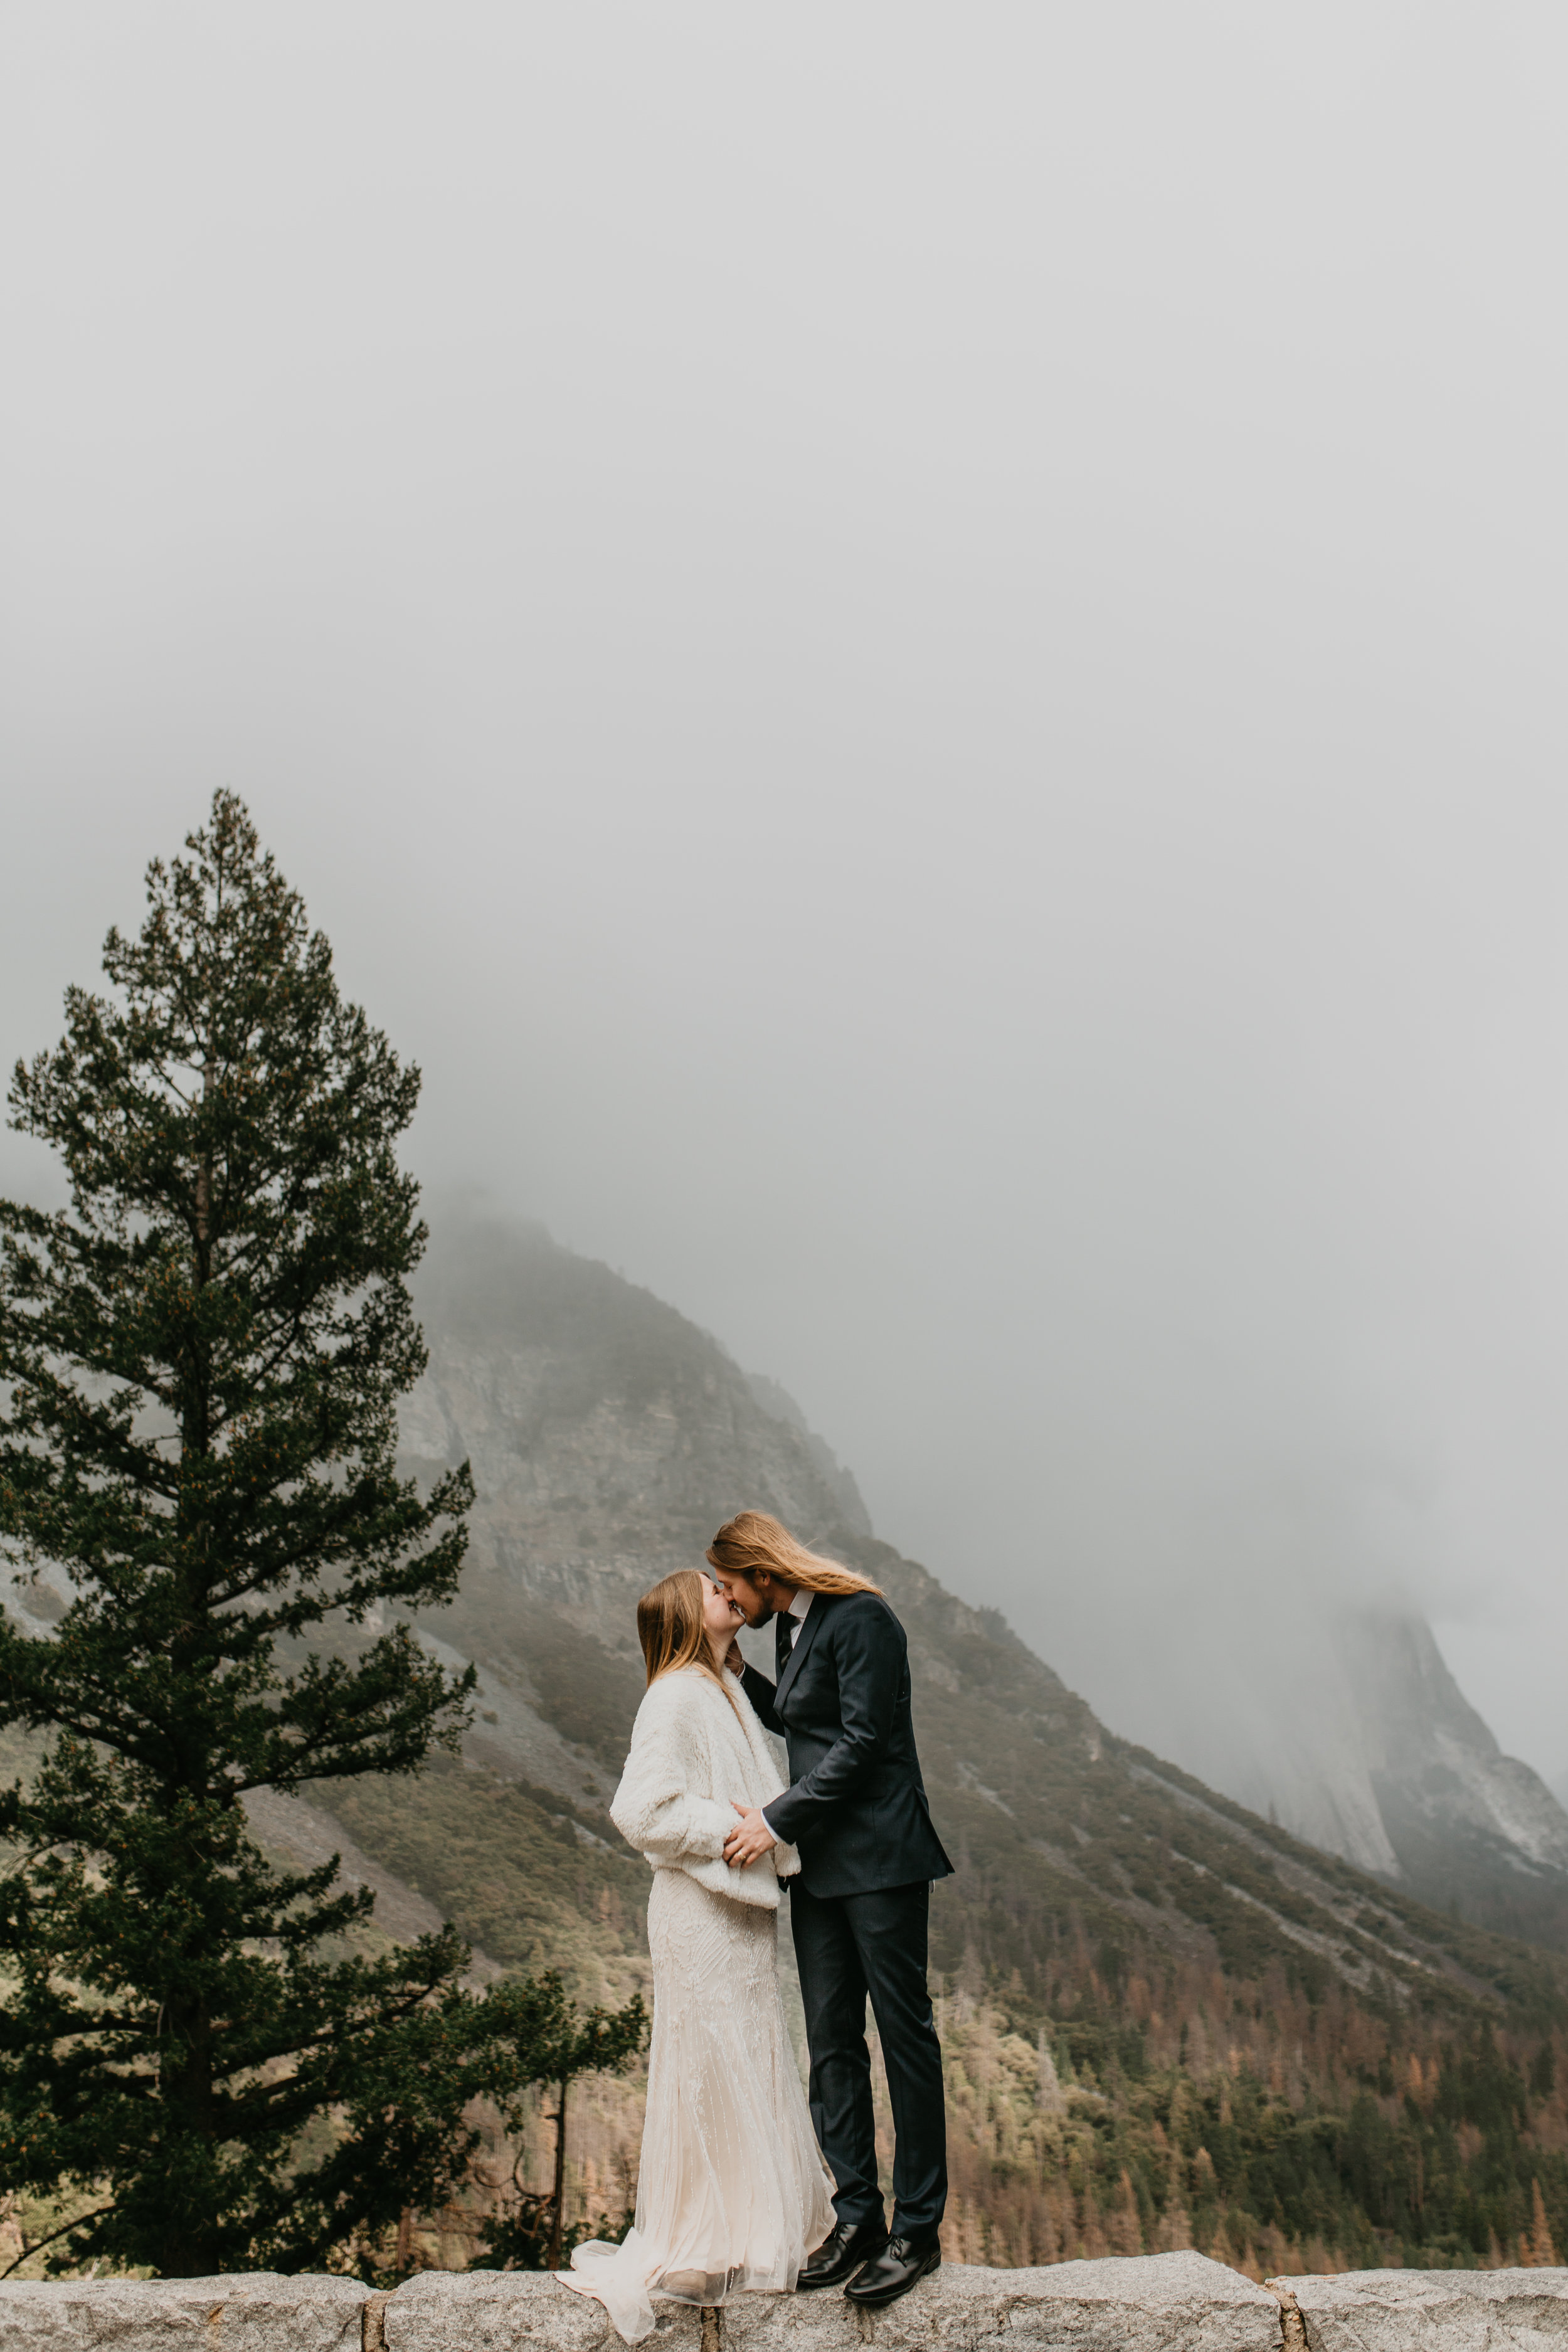 nicole-daacke-photography-yousemite-national-park-elopement-photographer-winter-cloud-moody-elope-inspiration-yosemite-valley-tunnel-view-winter-cloud-fog-weather-wedding-photos-17.jpg